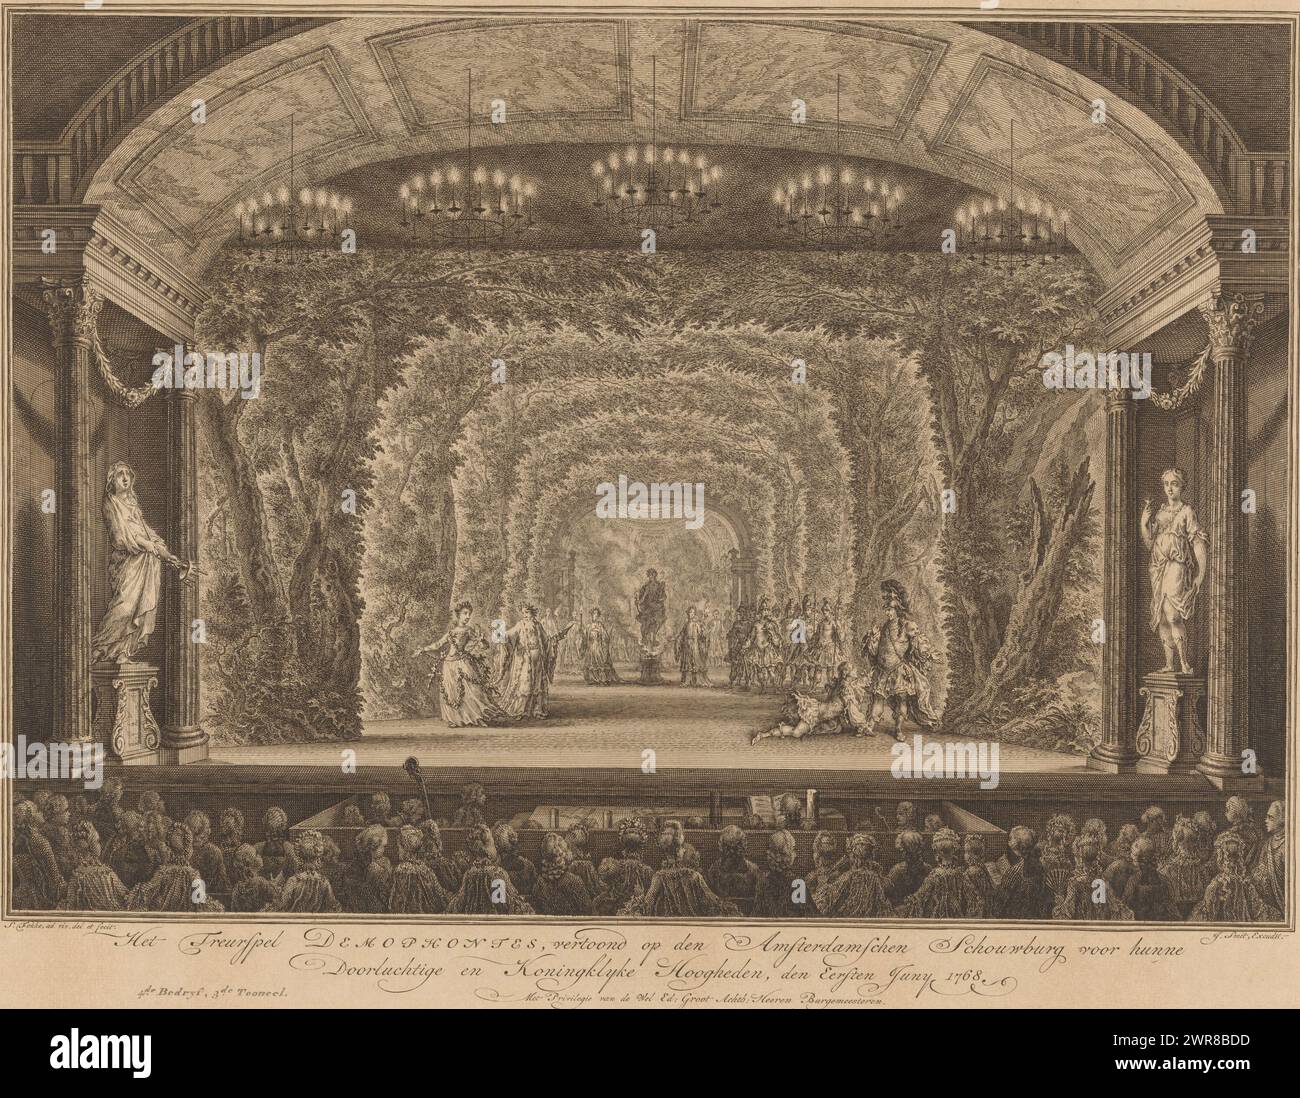 Theater performance in the Amsterdam Theater for the princely couple, 1768, The tragedy Demophontes, shown at the Amsterdam Theater for their illustrious and royal highnesses, the first of June, 1768 (title on object), Depiction of the joyous activities and ceremonies that occurred upon the arrival and during the stay of their (...) Willem, Prince of Orange and Nassau, (...) and his wife Fredrica Sophia Wilhelmina, Princess of Prussia, occurred in Amsterdam on Monday, May 30, and a few days following year 1768 (series title), Stage performance of the tragedy Demophontes Stock Photo